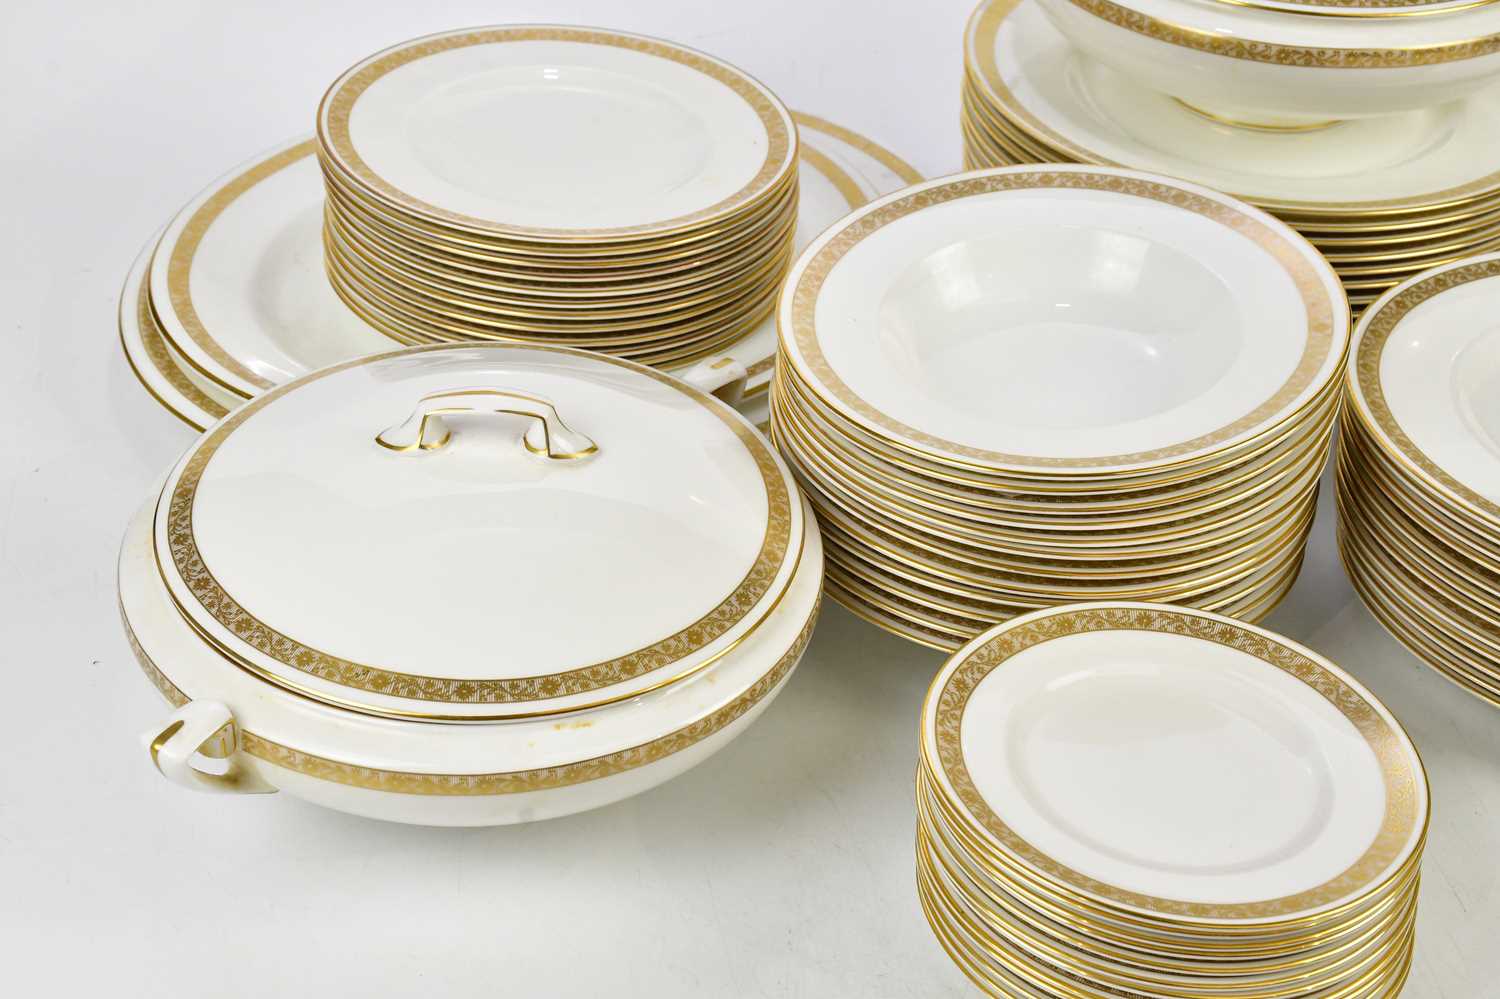 ROYAL WORCESTER; an extensive tea and dinner service in the 'Golden Anniversary' pattern. - Image 2 of 3